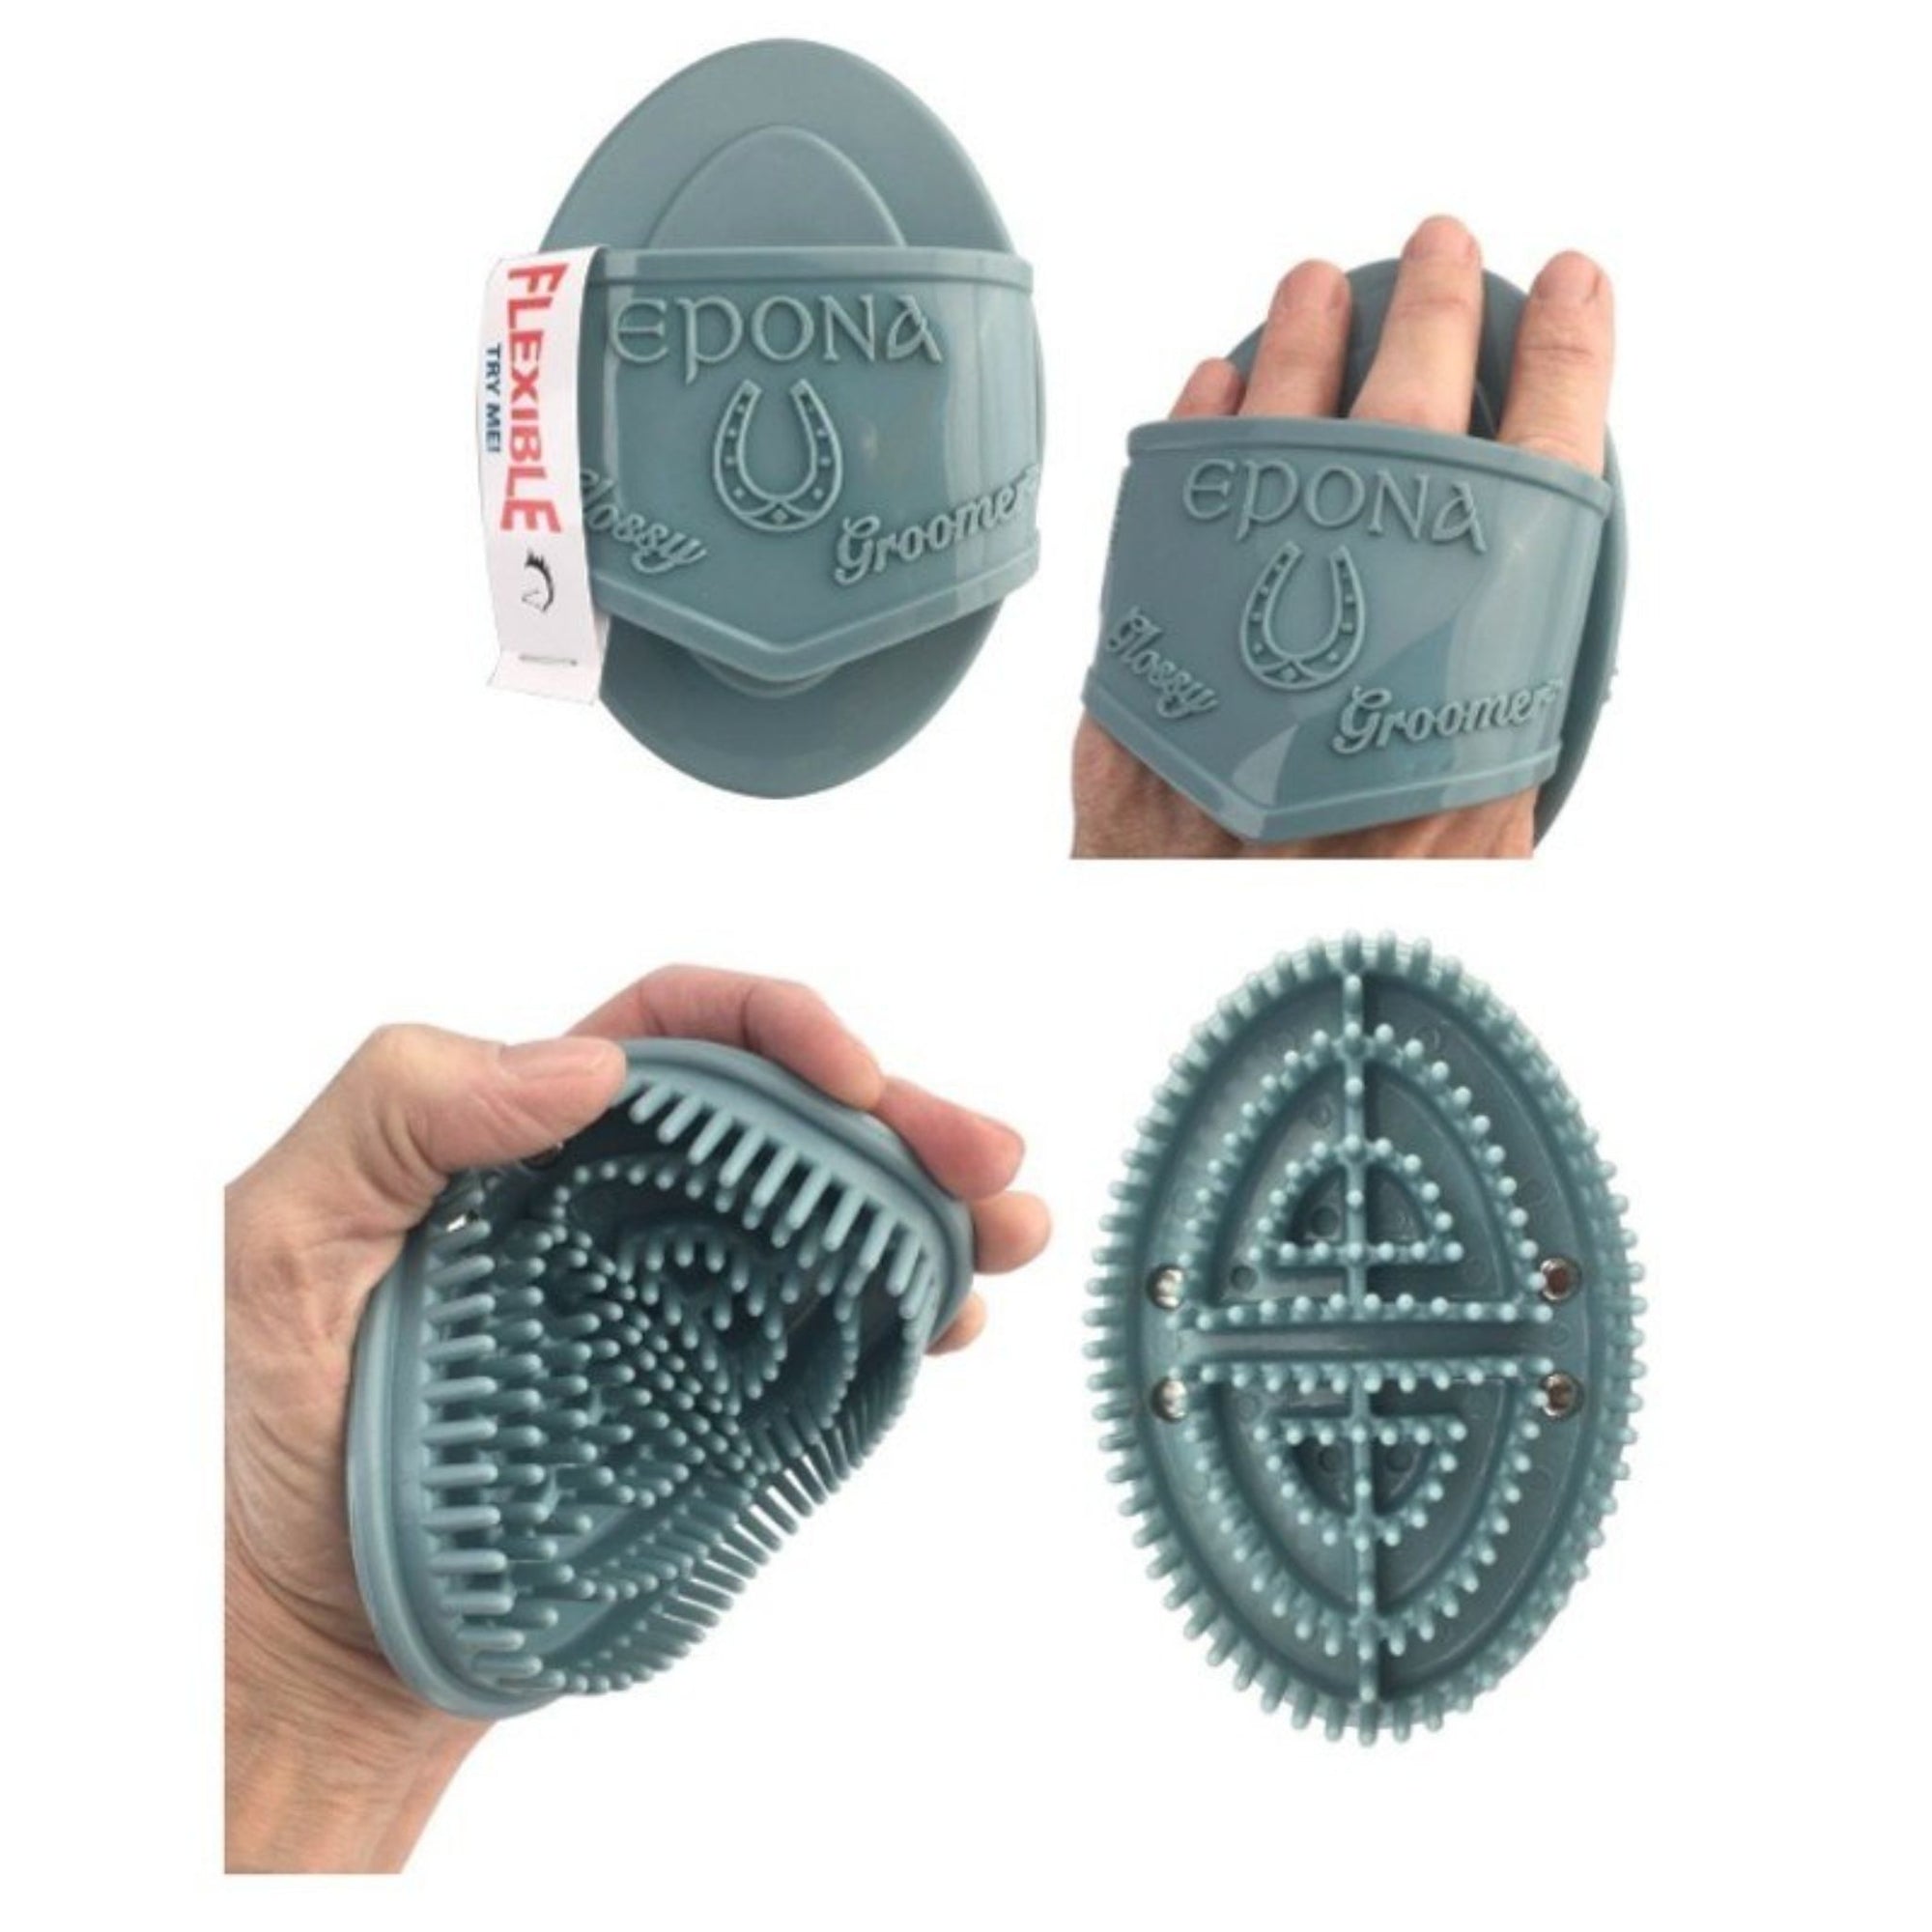 Light blue rubber curry comb with silicone hand strap and text.